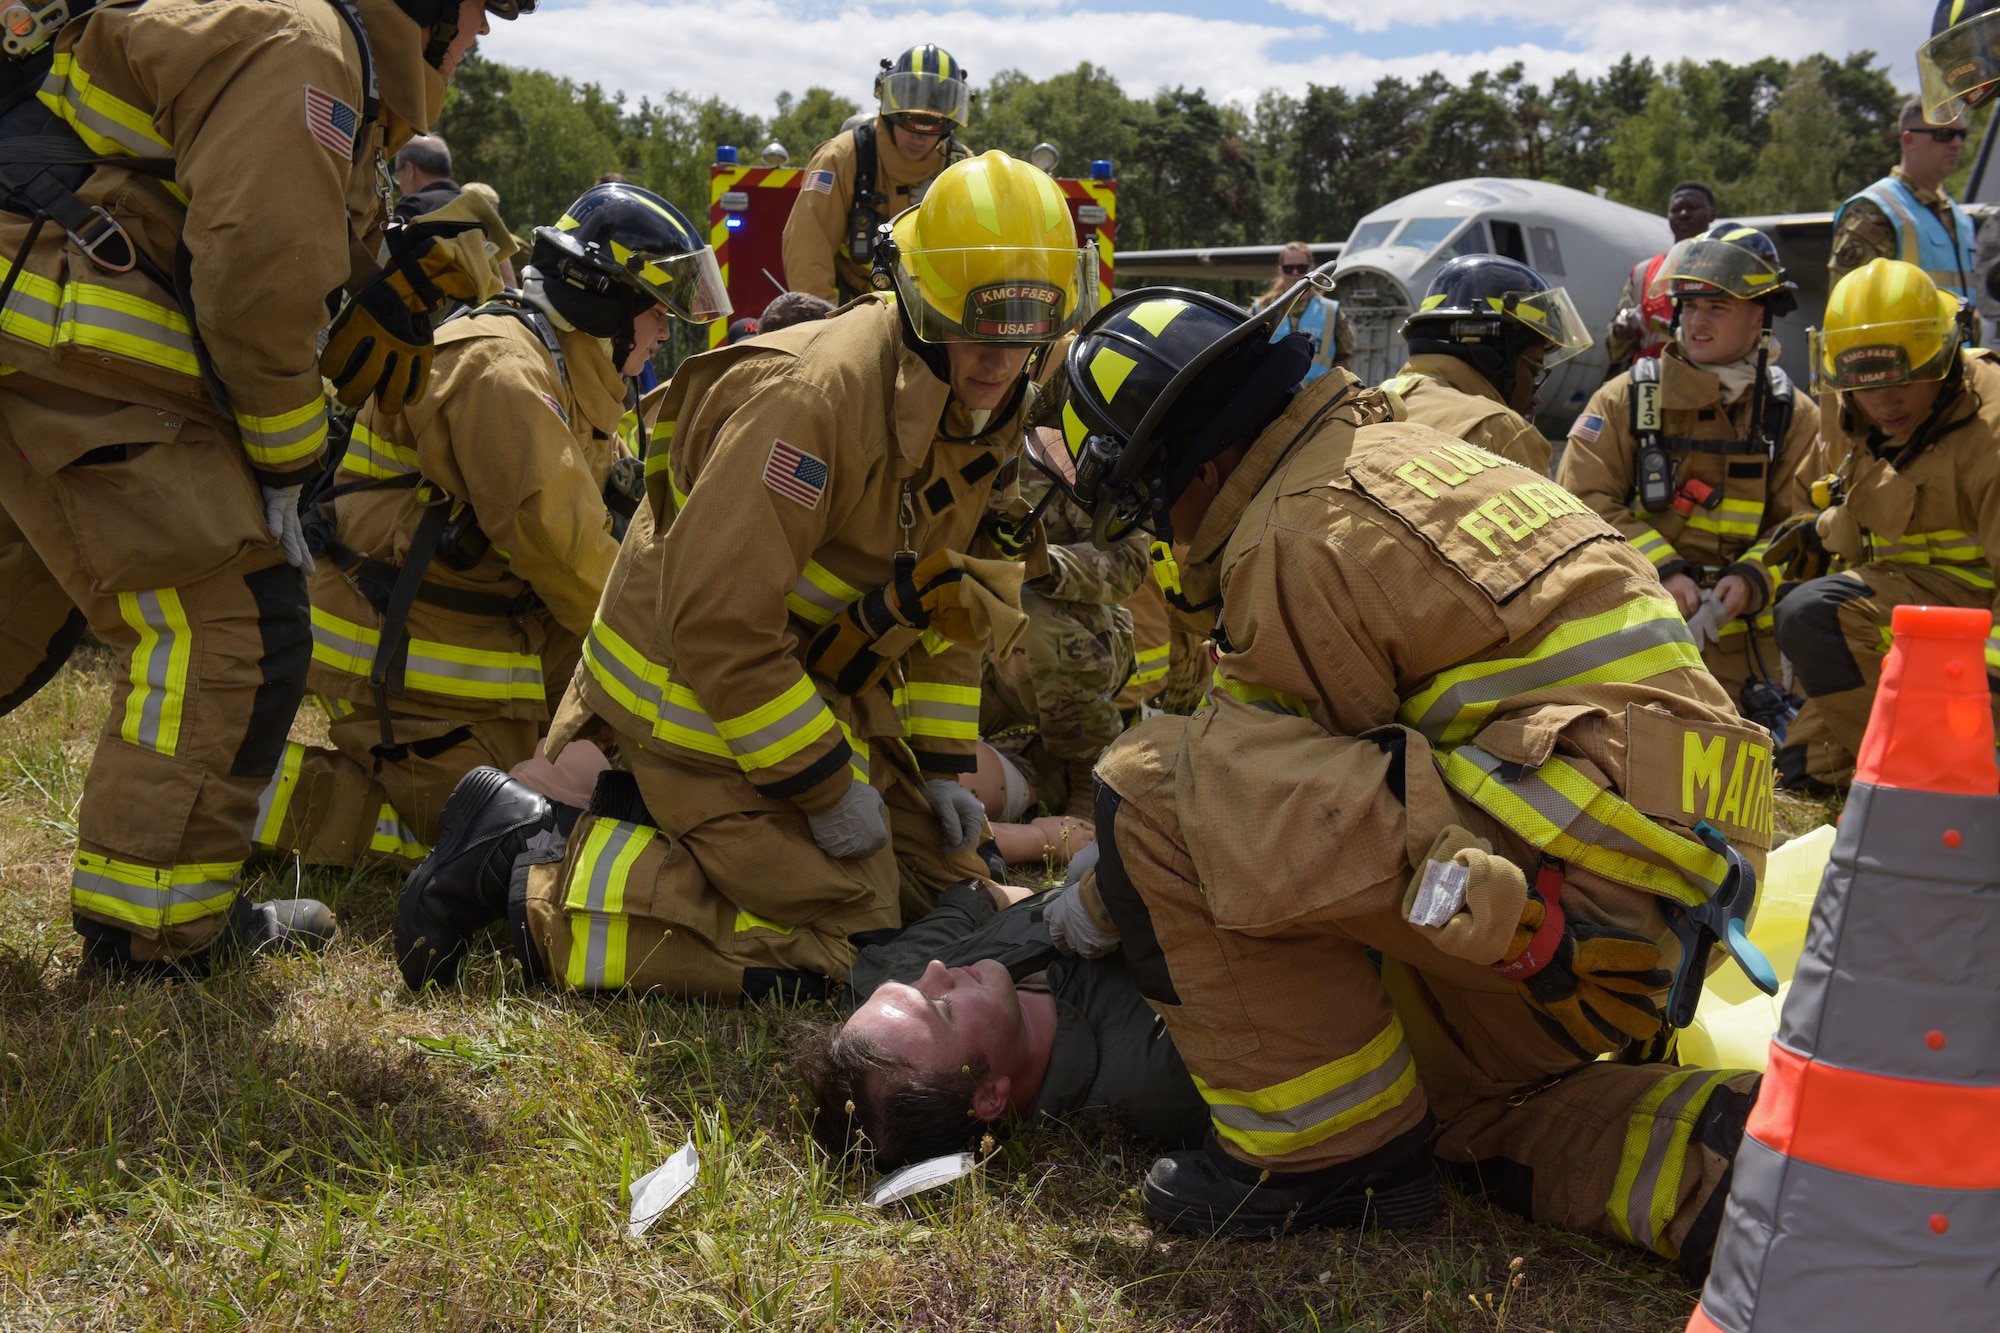 Firemen provide first aid to simulated injured personnel